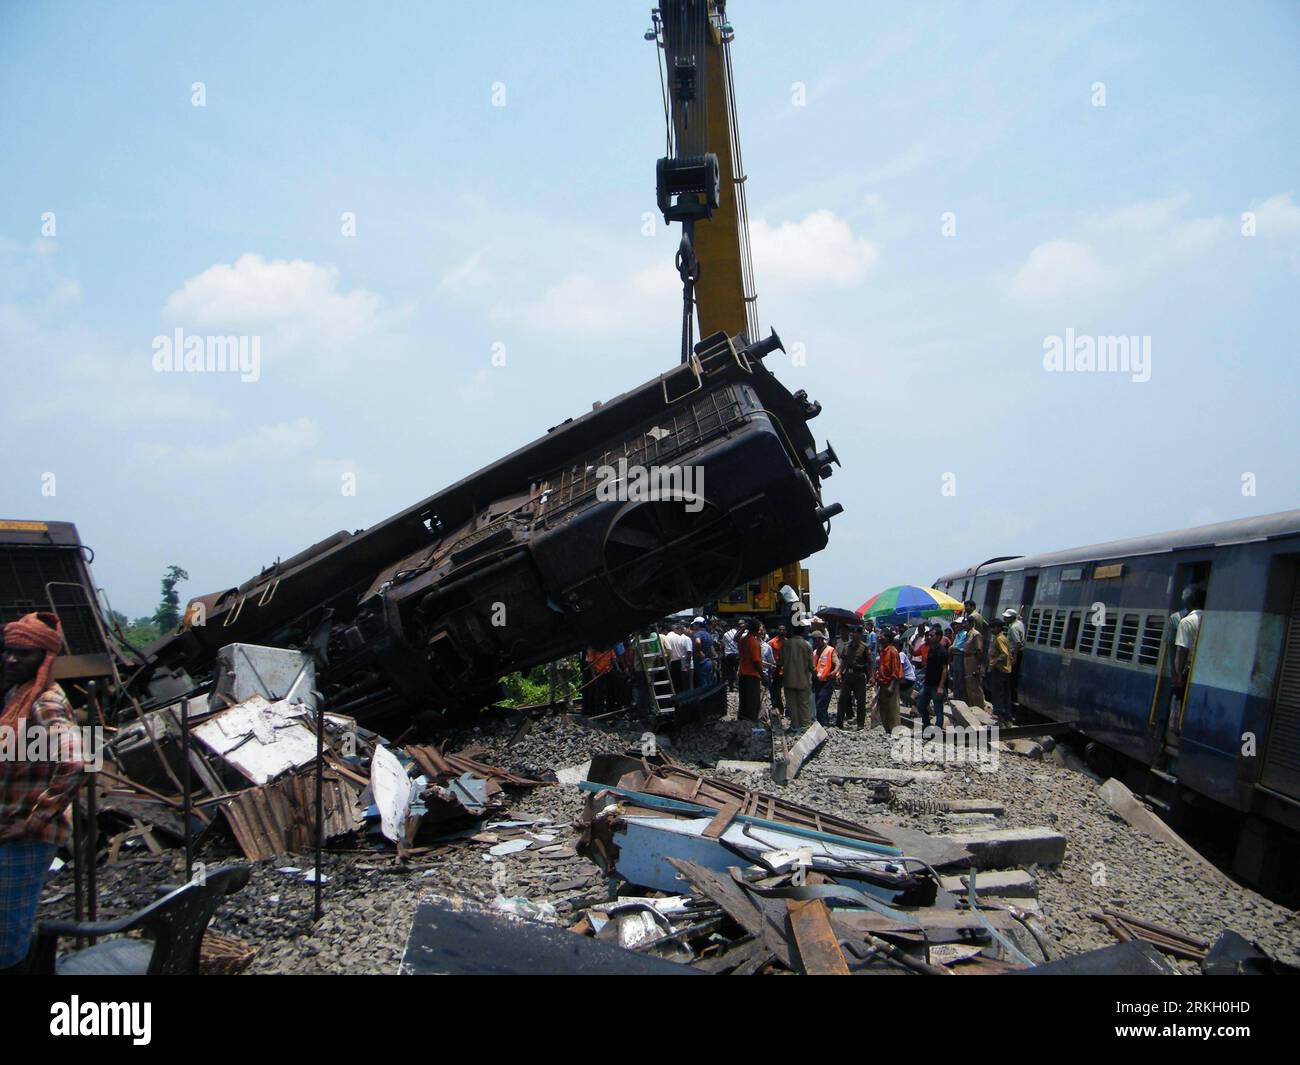 Bildnummer: 55672403  Datum: 31.07.2011  Copyright: imago/Xinhua (110801) -- CALCUTTA, Aug. 1, 2011 (Xinhua) -- Cranes lift carriages to clear the railway track at the scene of a train crash near Jamirghata station at Malda district of West Bengal, India on July, 31, 2011. The death toll in the train collision Sunday evening in the eastern Indian state West Bengal has risen to three while 50 others were injured, said railway officials on Monday. (Xinhua Photo/Stringer)(axy) INDIA-WEST BENGAL-TRAIN CRASH PUBLICATIONxNOTxINxCHN Gesellschaft Zugunglück Unglück Unfall Kran xdp premiumd 2011 quer Stock Photo